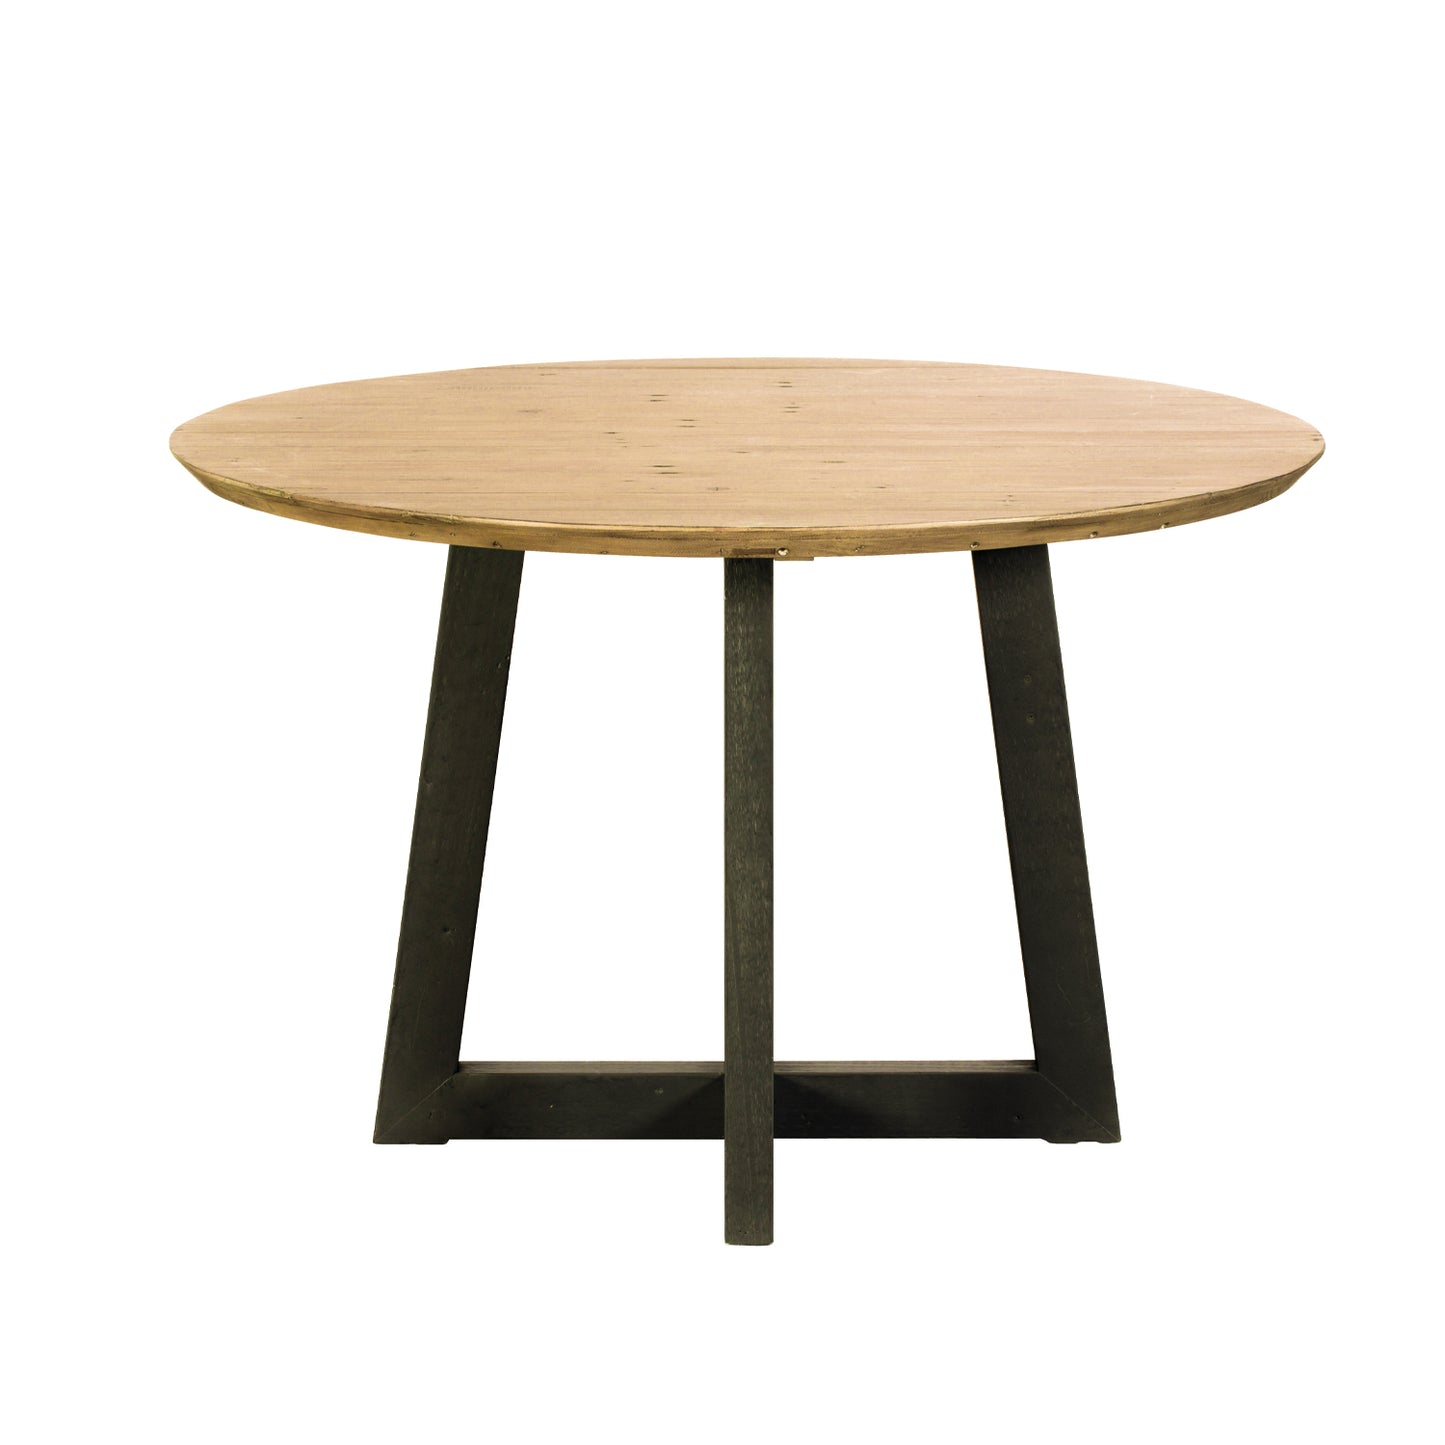 Lawrence Hill Dining Table - 120cm Round